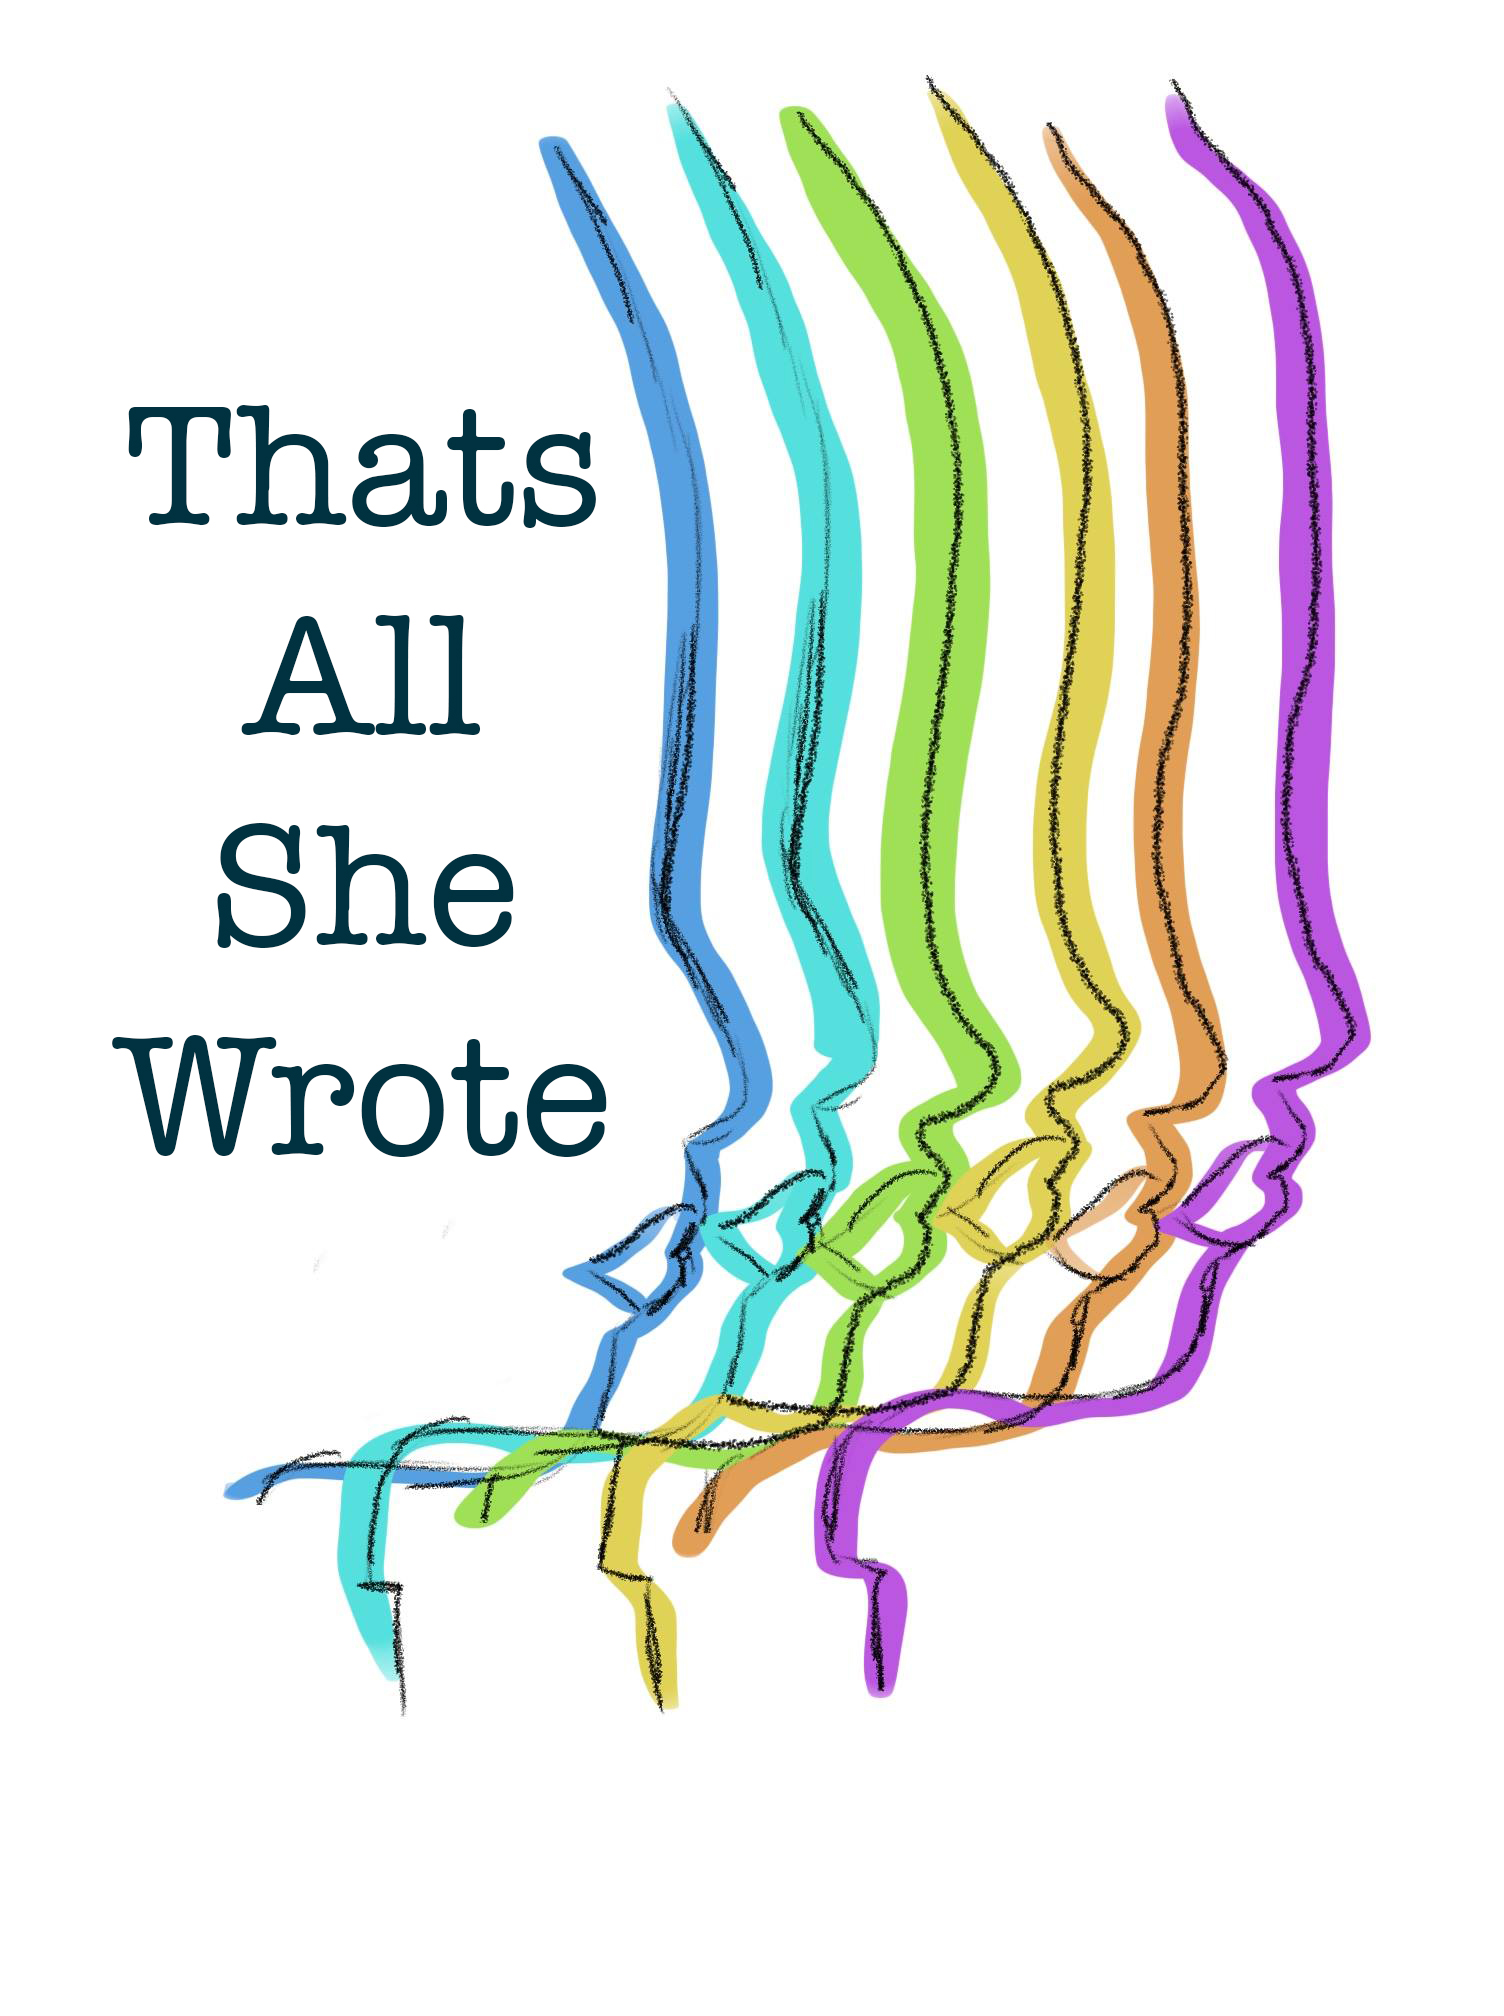 GRAPHIC: "Thats all she wrote" text and female face silhouettes. GRAPHIC: Thats all she wrote text and female face silhouettes. Graphic by The Signal reporter Chelsea Hobbs.